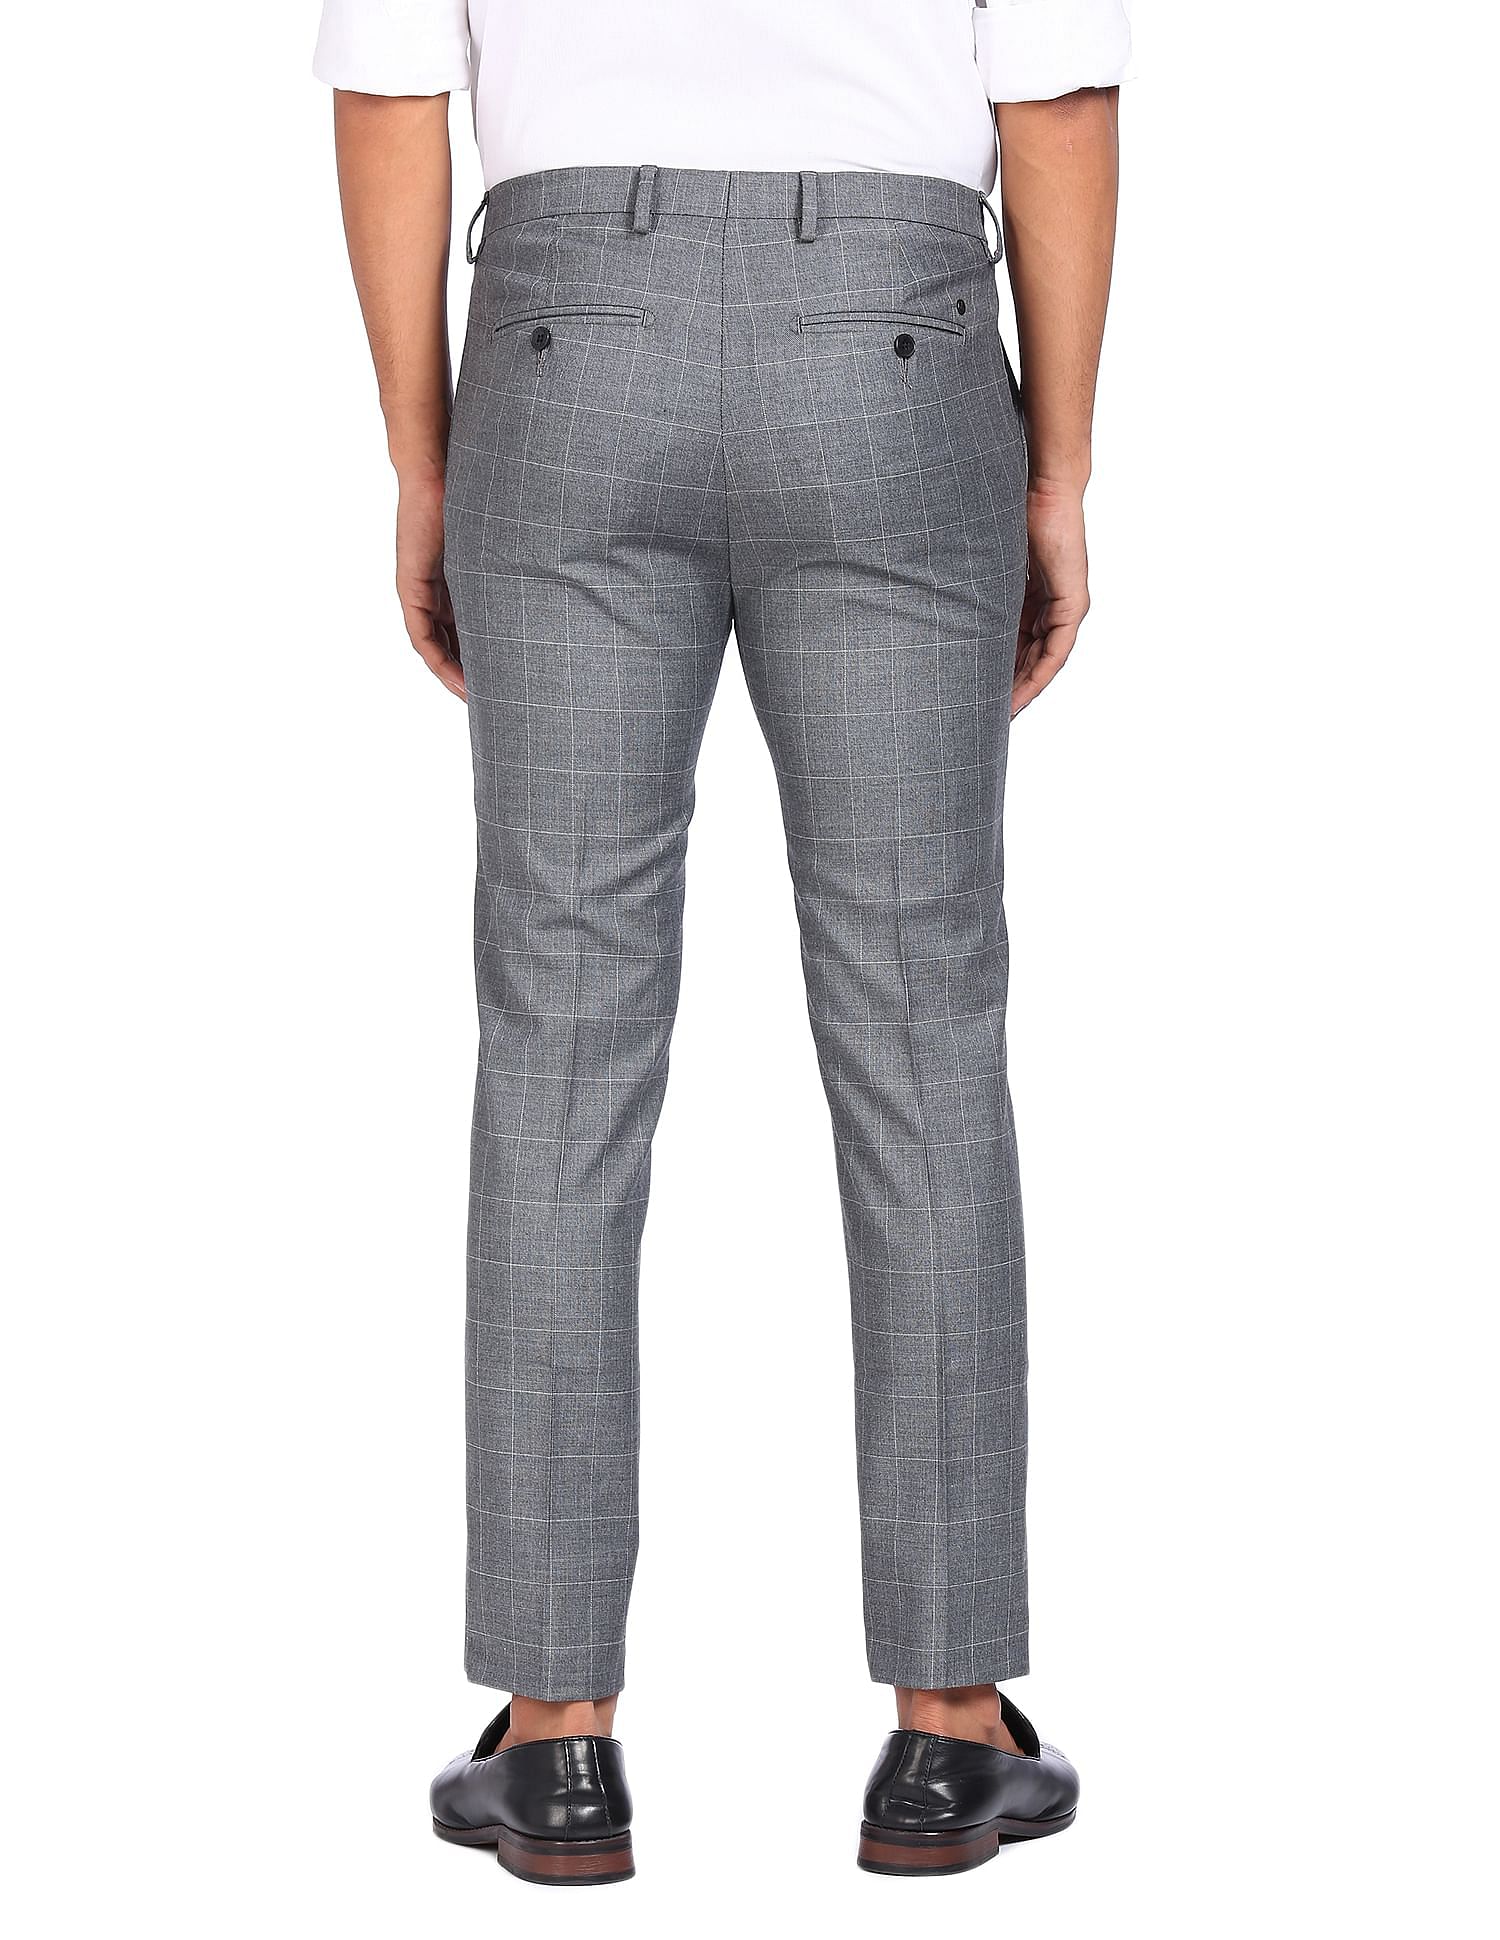 River Island checked suit trousers in grey  ASOS